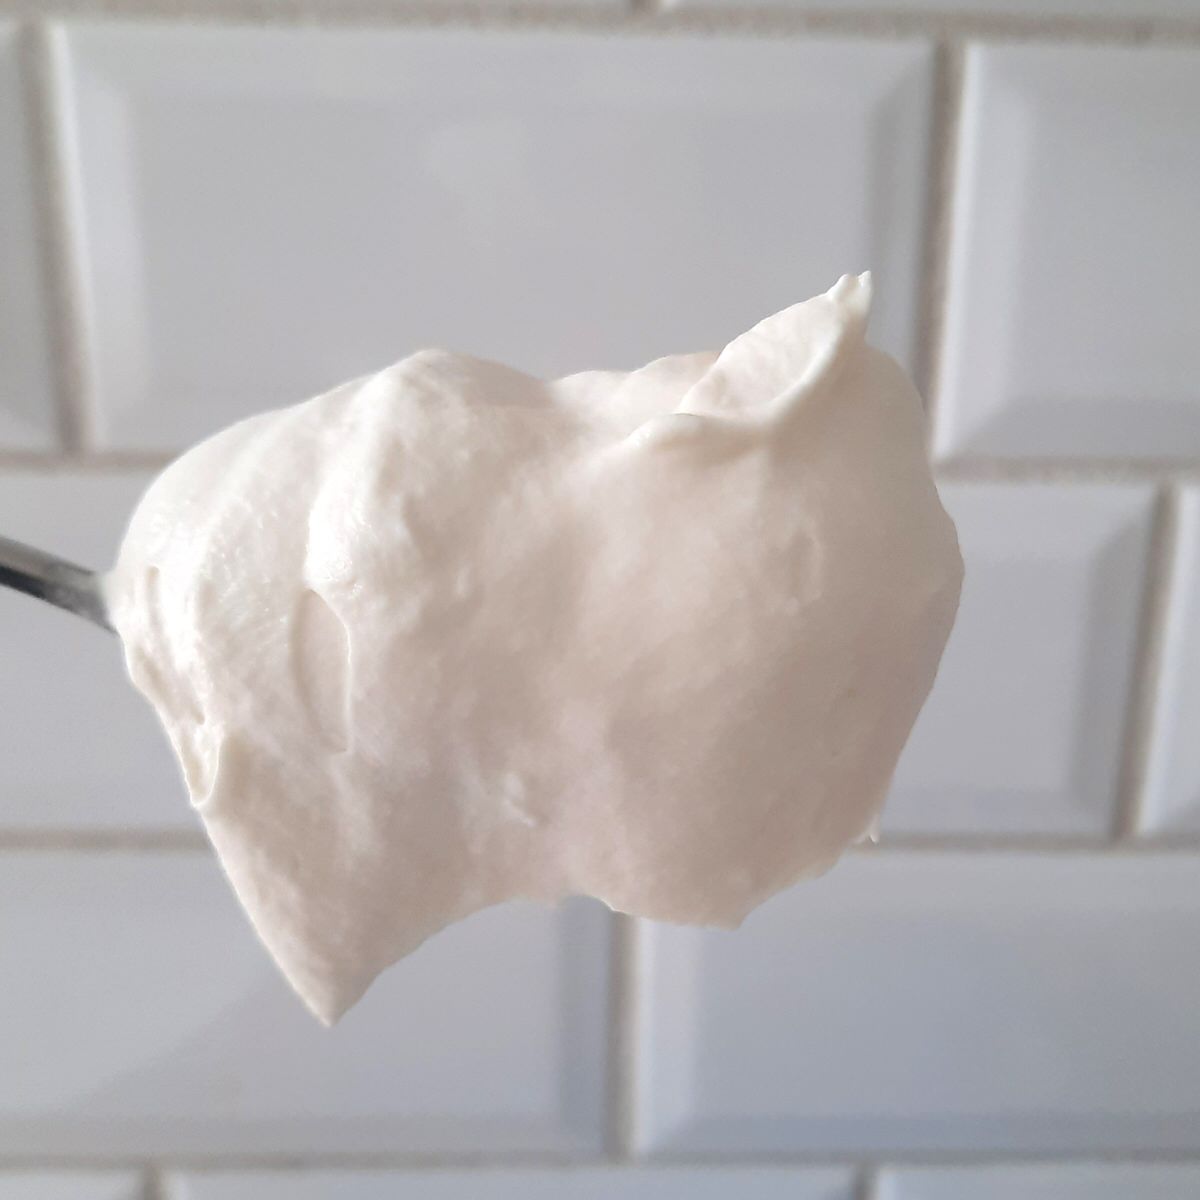 whipped cream piled high on a spoon